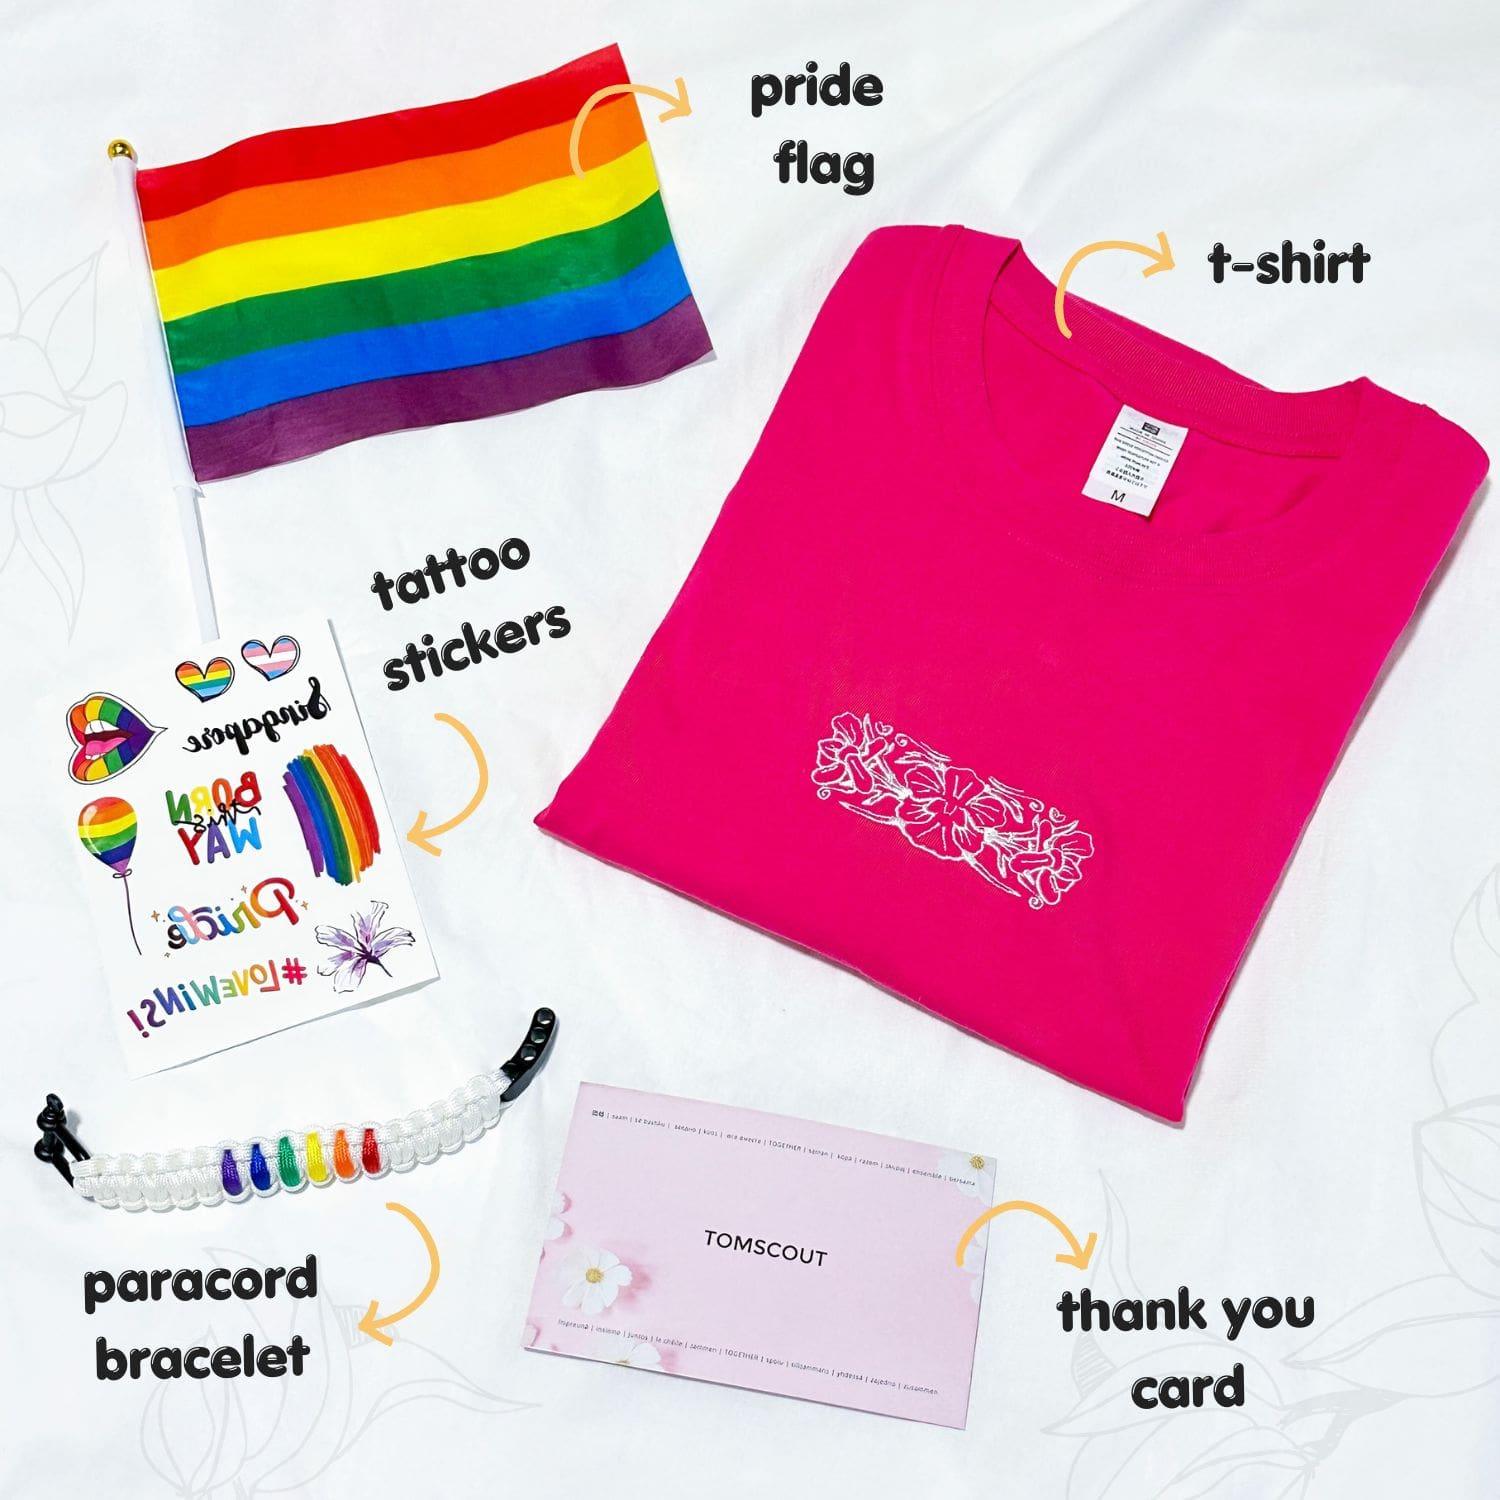 The product photo of a pride kit includes a hot pink t-shirt, a small pride flag, a paracord bracelet, a tattoo sticker, and a thank you card. TOMSCOUT Flourish - LGBT Pride Kits (Singapore)